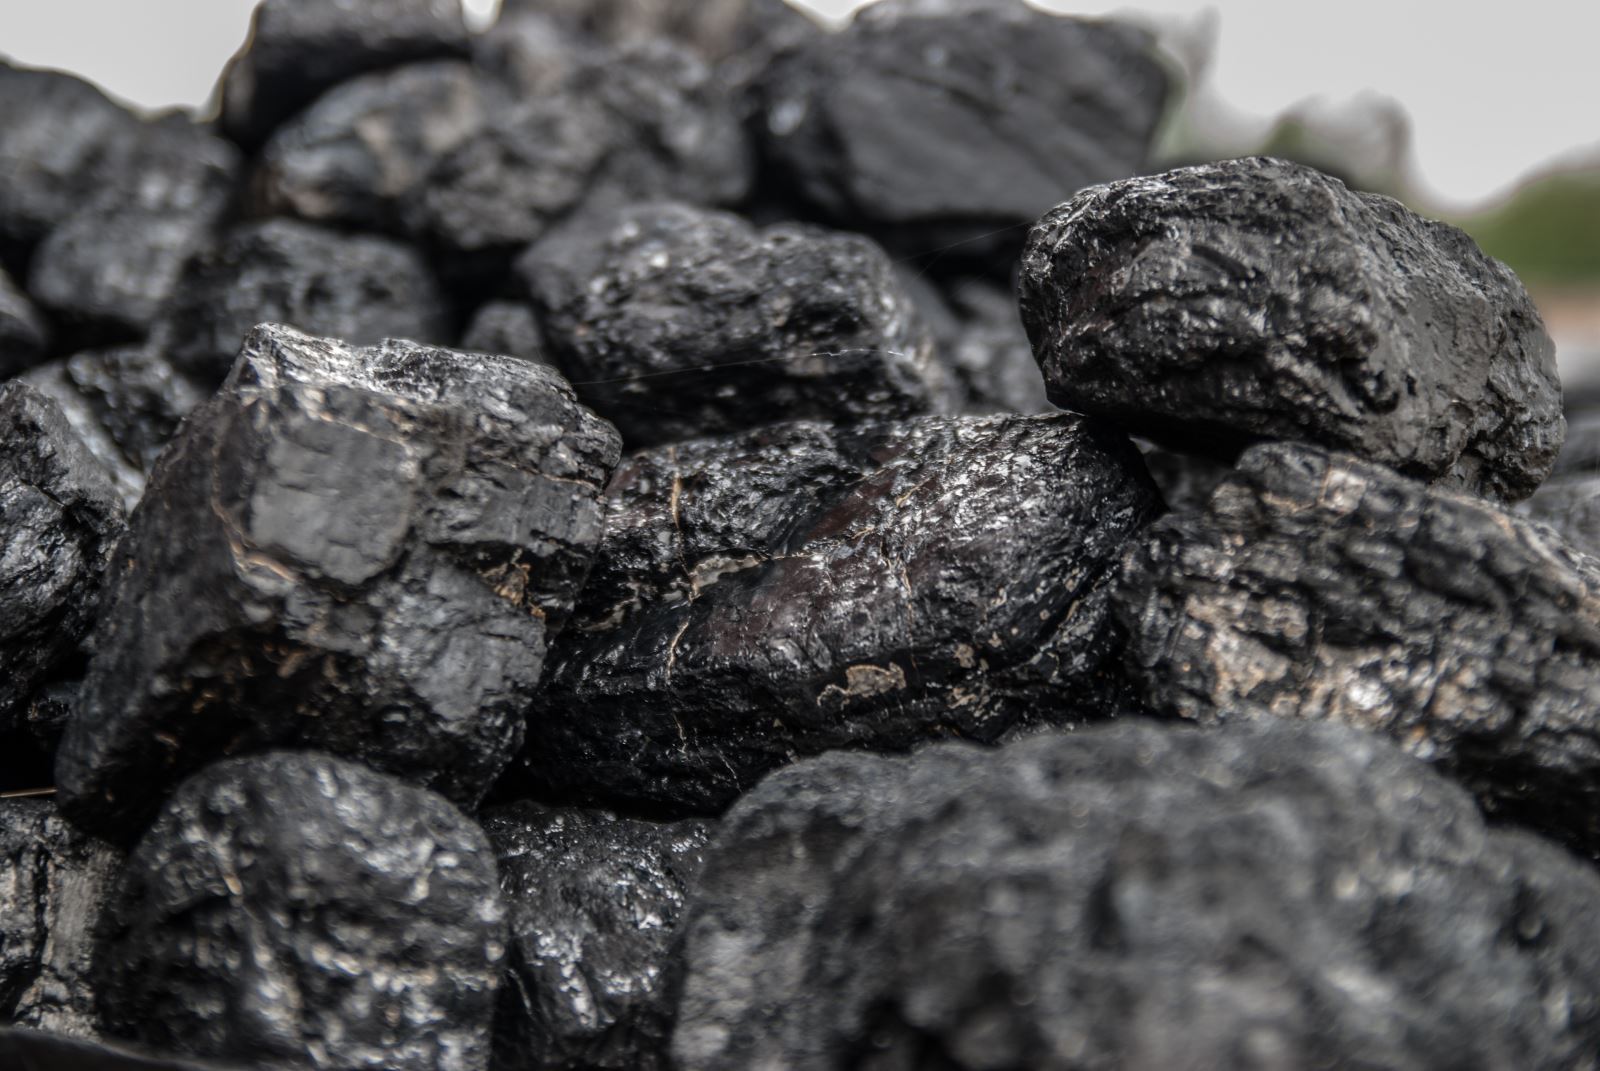 Expert Analysis Finds Alliant Customers are Paying Too Much for Coal